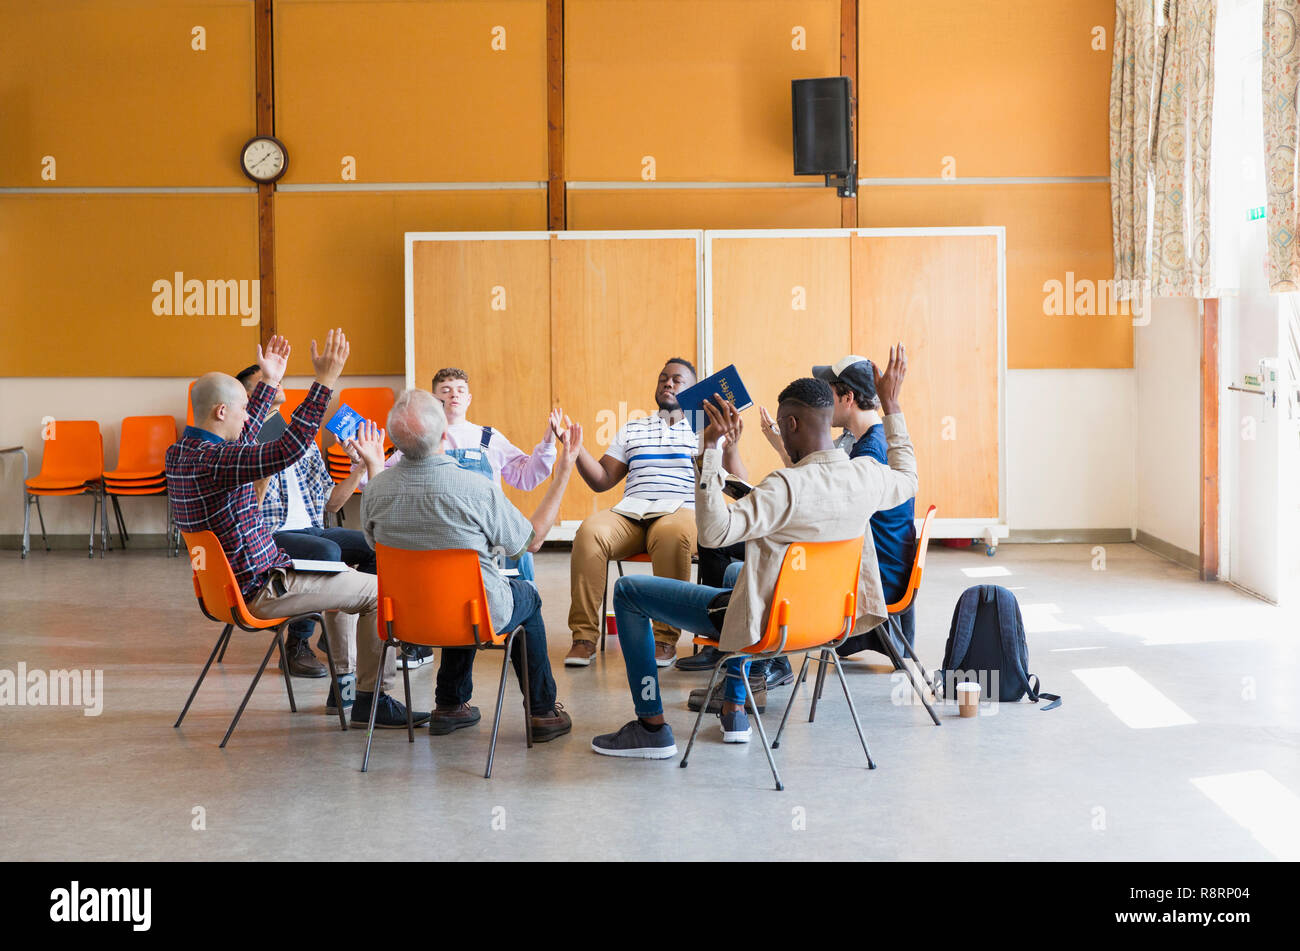 Men praying with arms raised in prayer group in community center Stock Photo